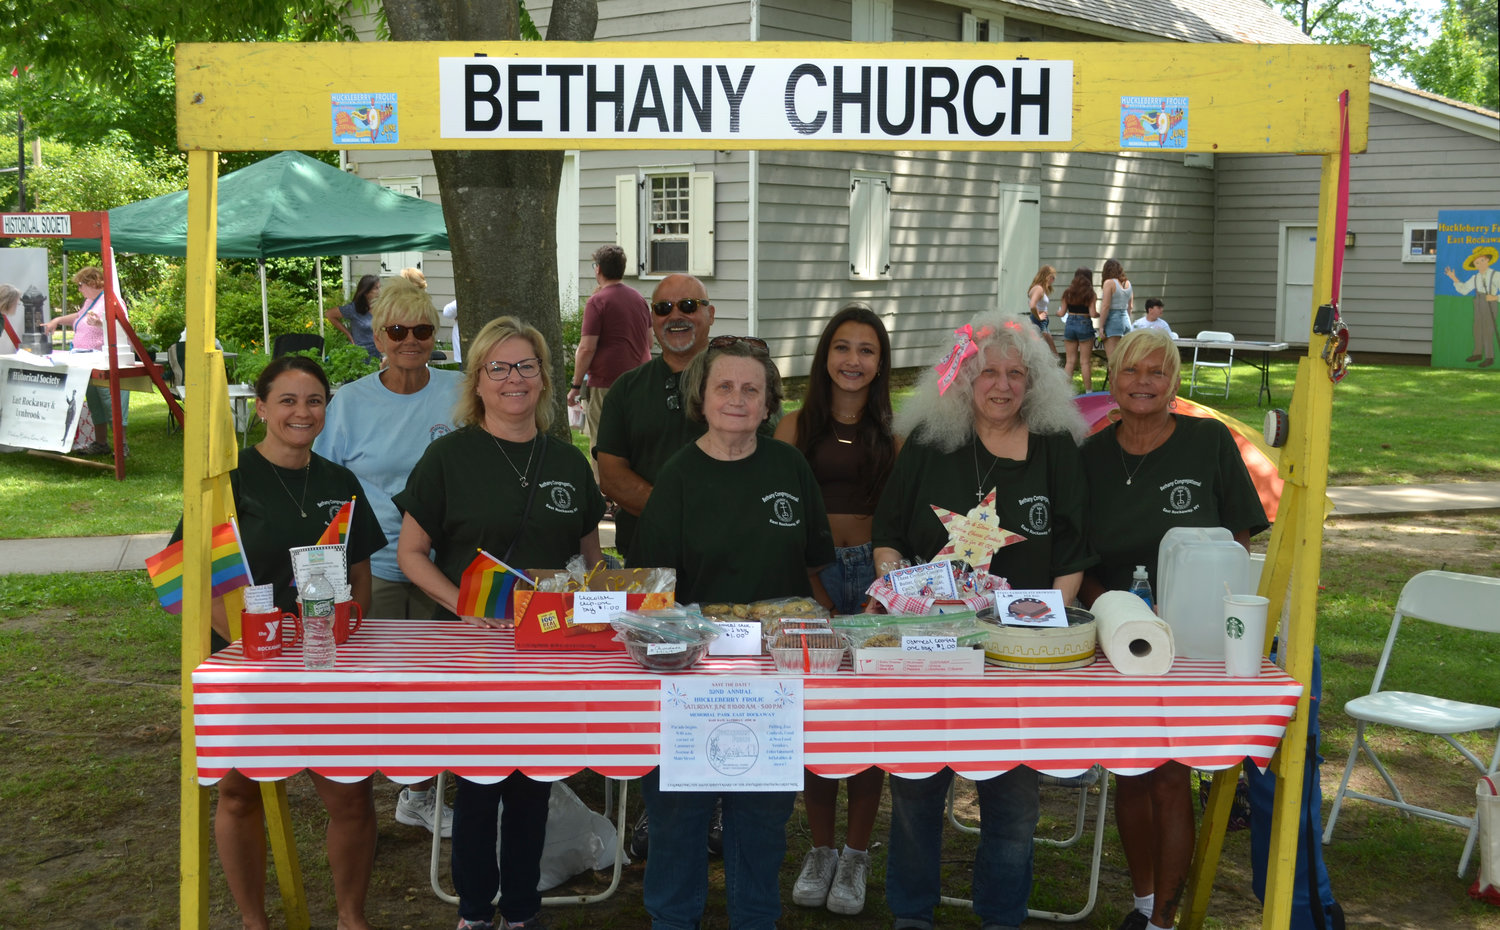 Bethany Church members also attended.